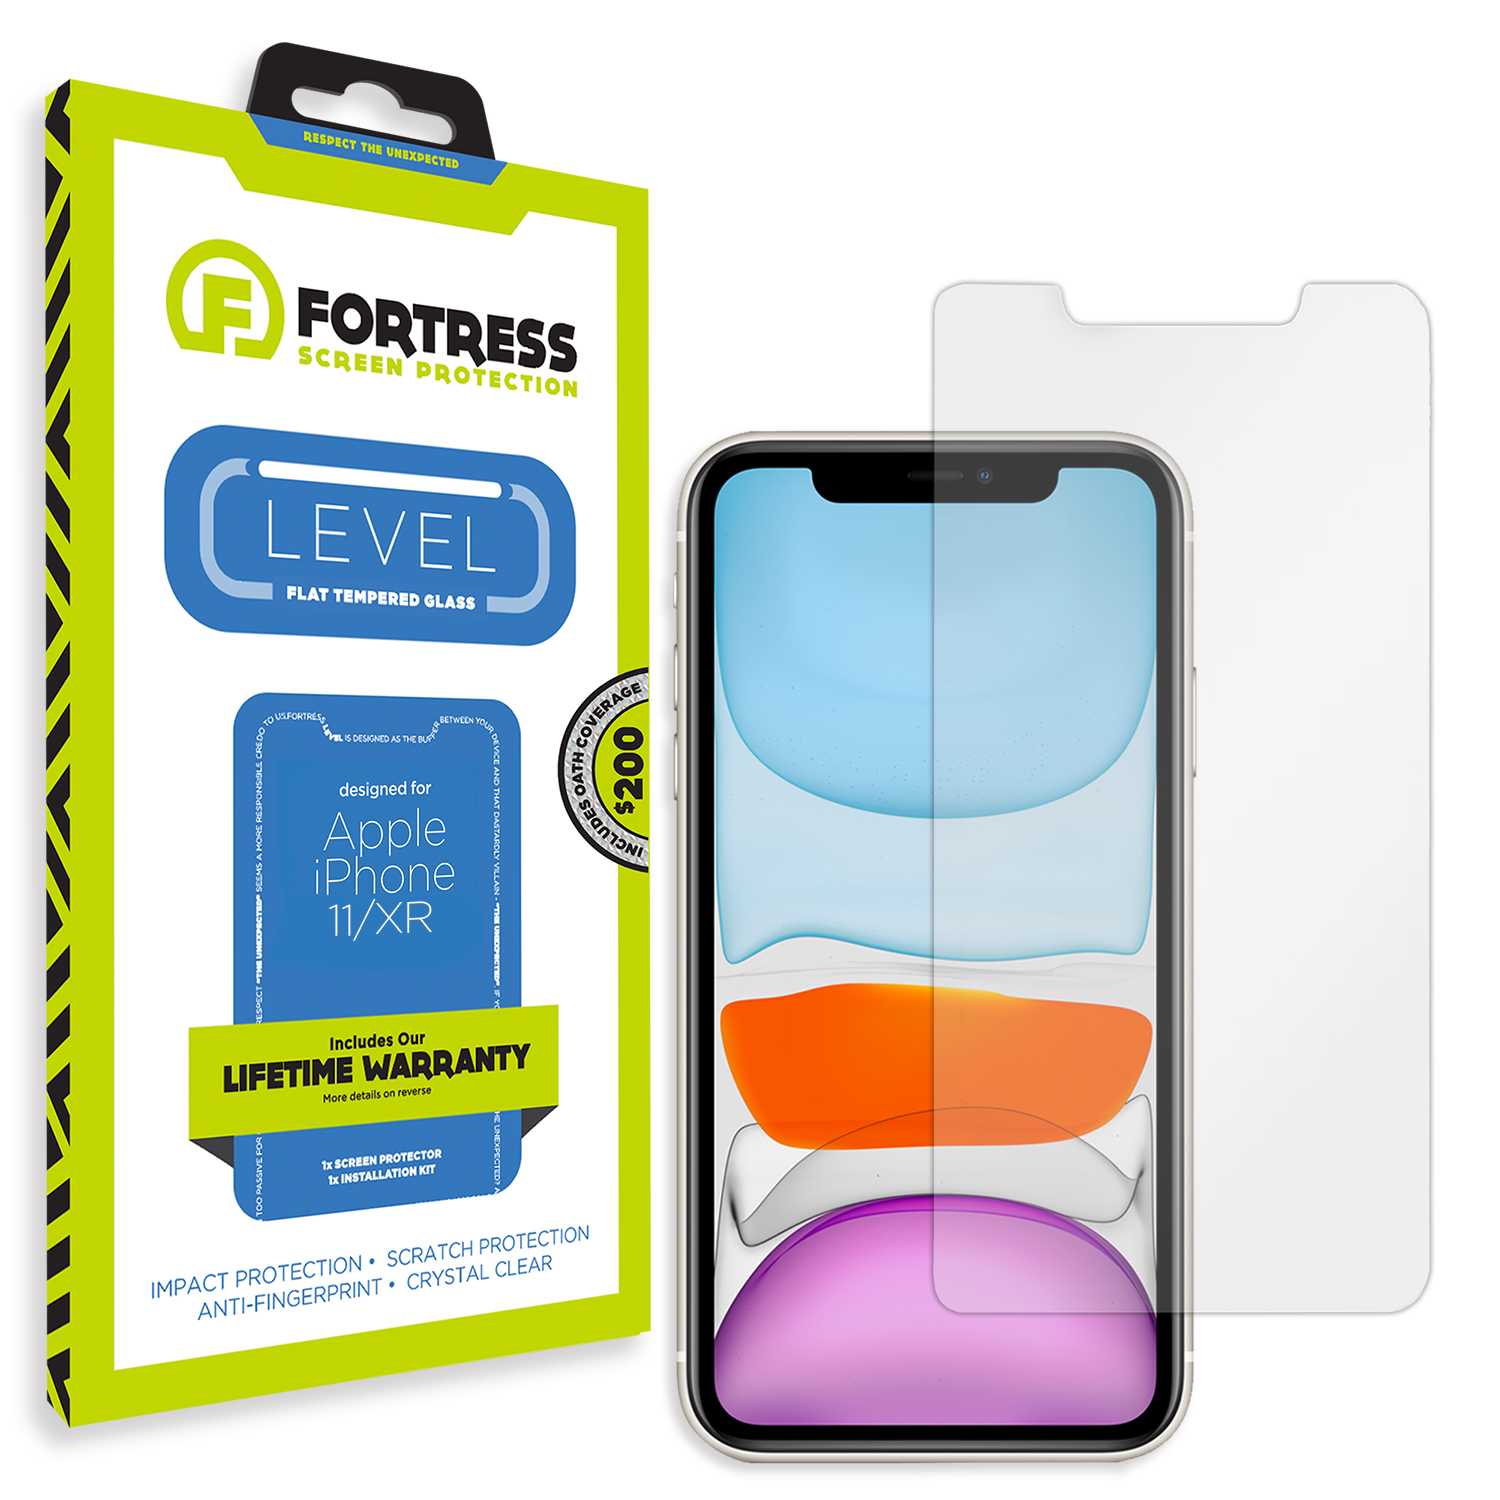 Fortress iPhone XR Screen Protector $200Coverage Scooch Screen Protector